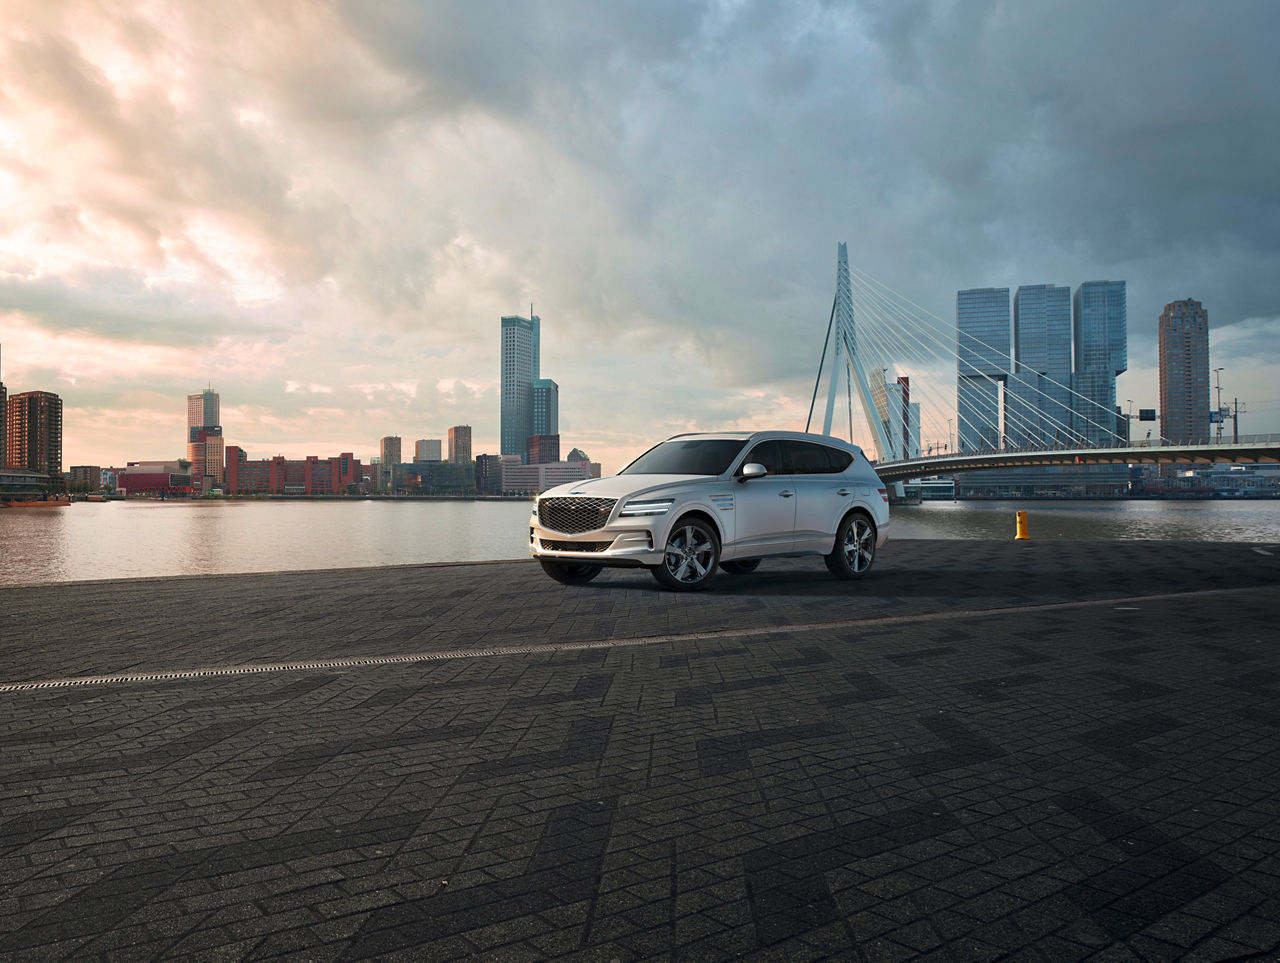 White Genesis GV80 in front of a river with a bridge and the skyline of a city in the background